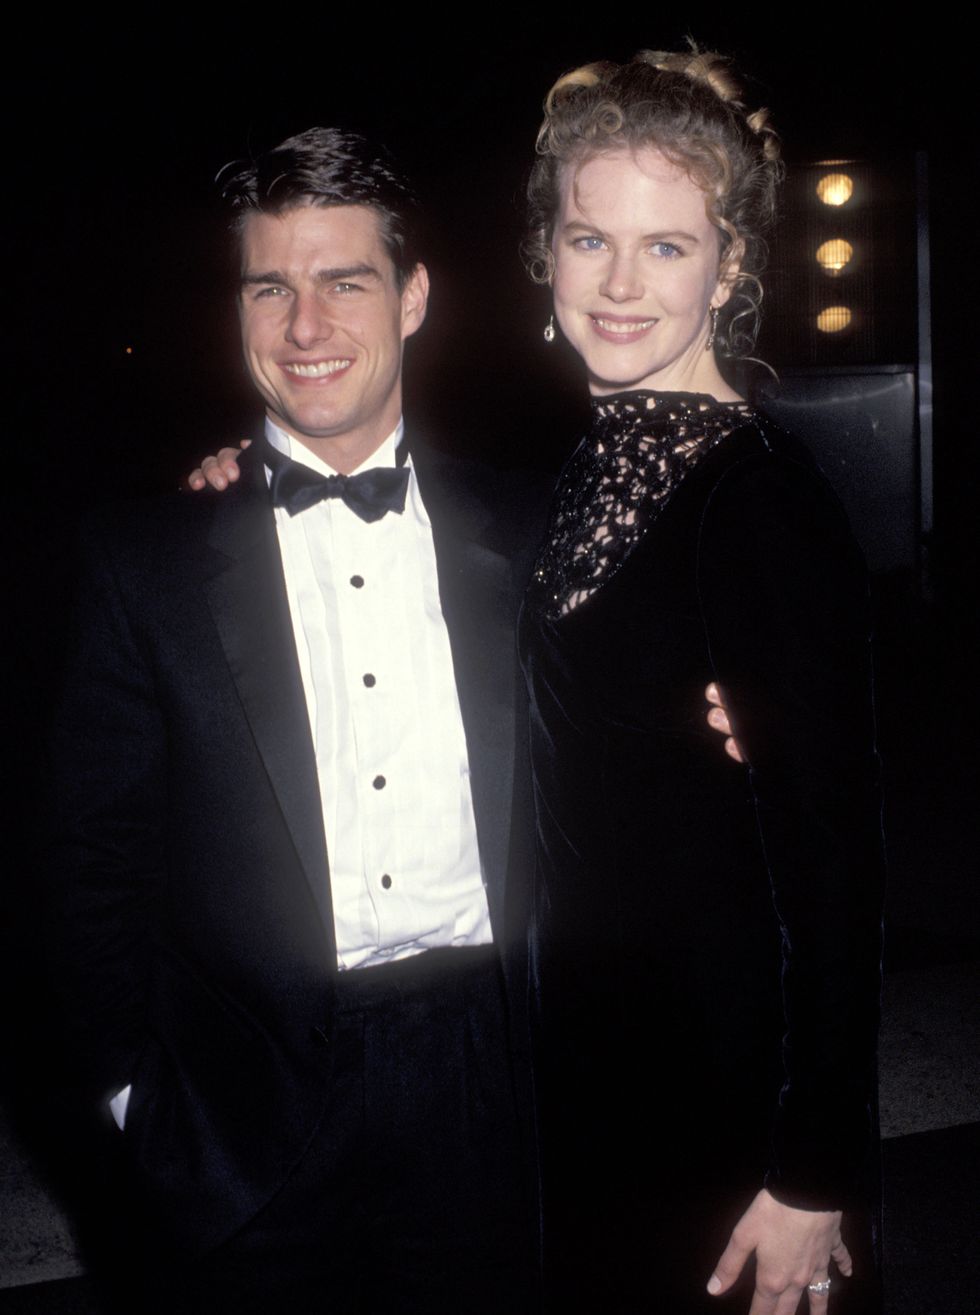 actor tom cruise and actress nicole kidman attend the carmen opening night performance on january 22, 1992 at dorothy chandler pavilion, los angeles music center in los angeles, california photo by ron galella, ltdron galella collection via getty images